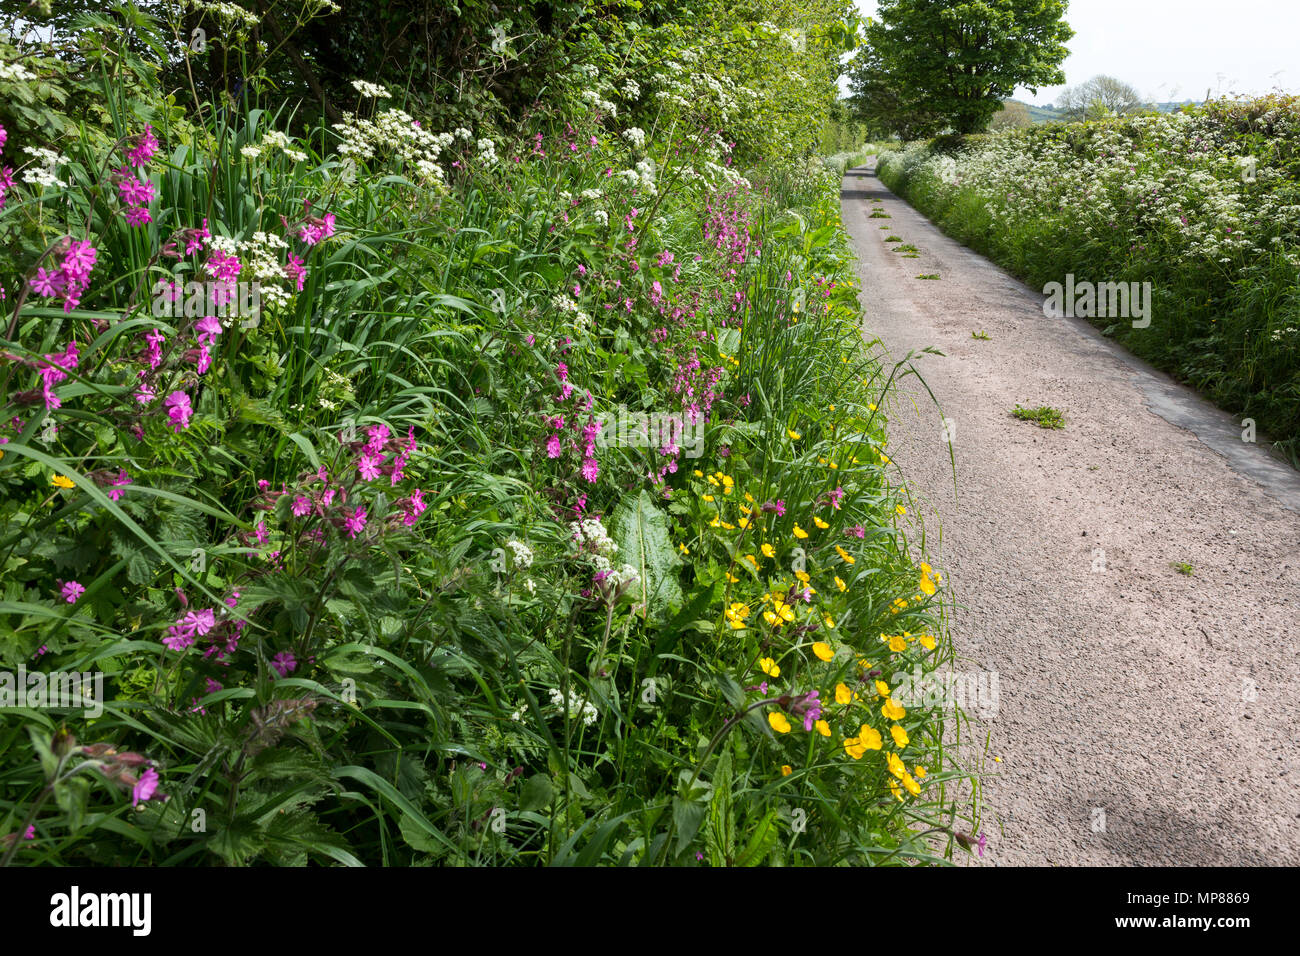 Roadside verge in the countryside in spring, full of wild flowers and grasses Stock Photo